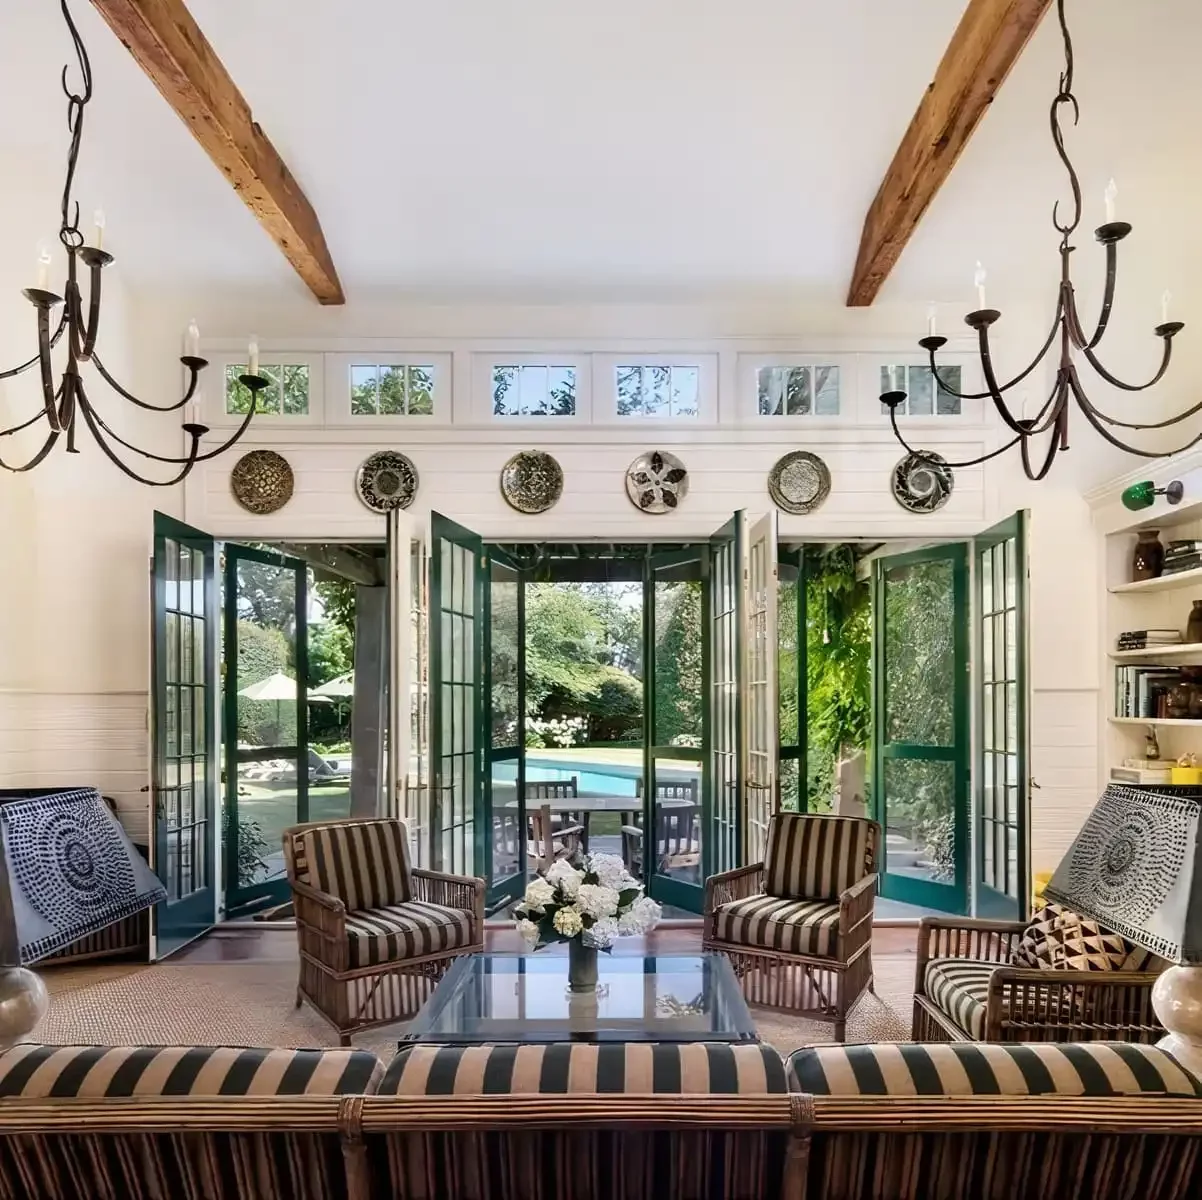 inside Robert Downey Jr.'s house in the form of a windmill.